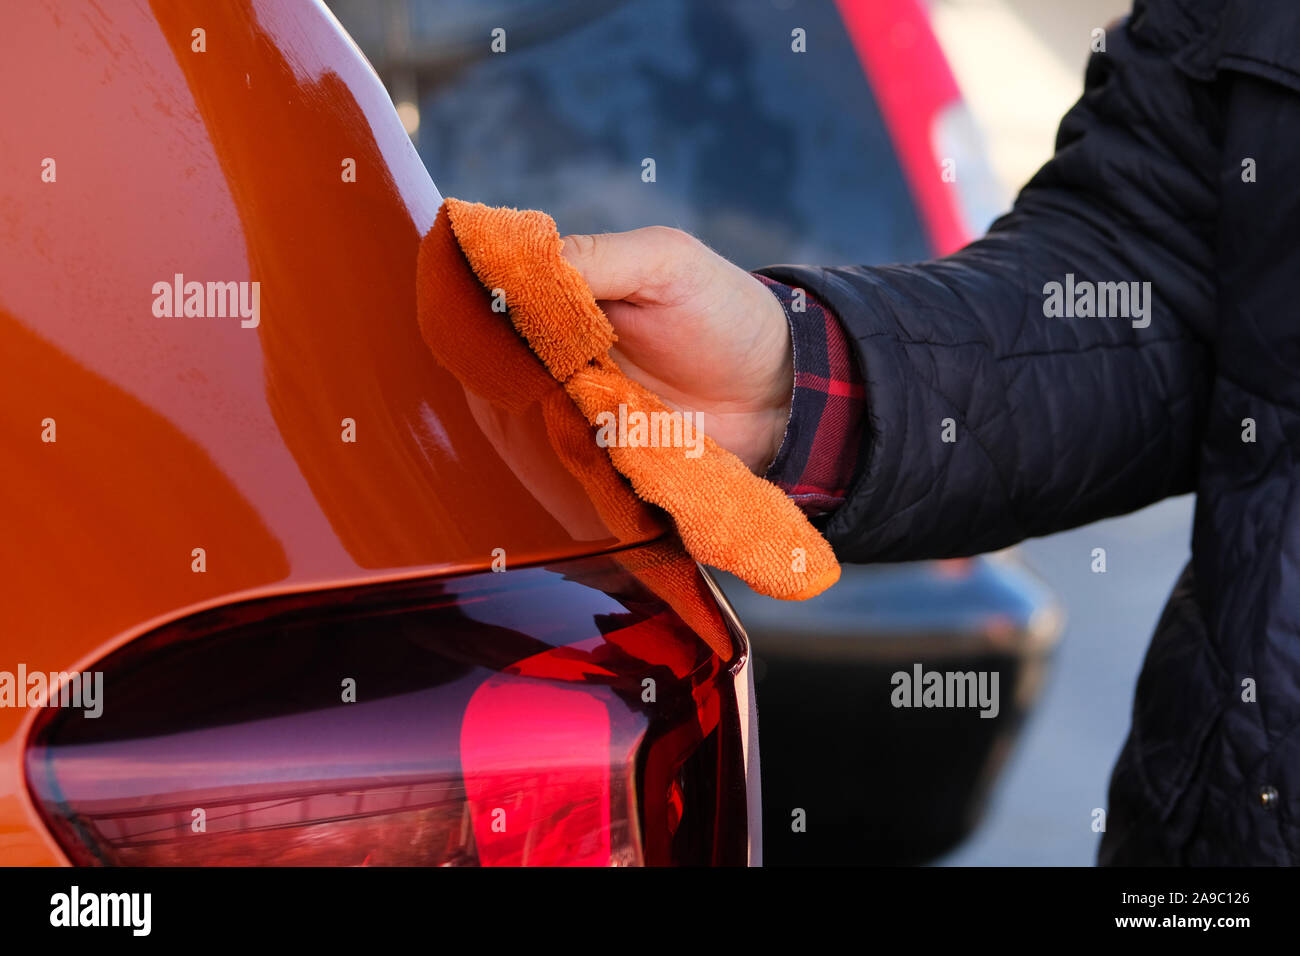 Man after washing wipes his orange car with a rag  at car wash. Male hand and car body close up. Stock Photo